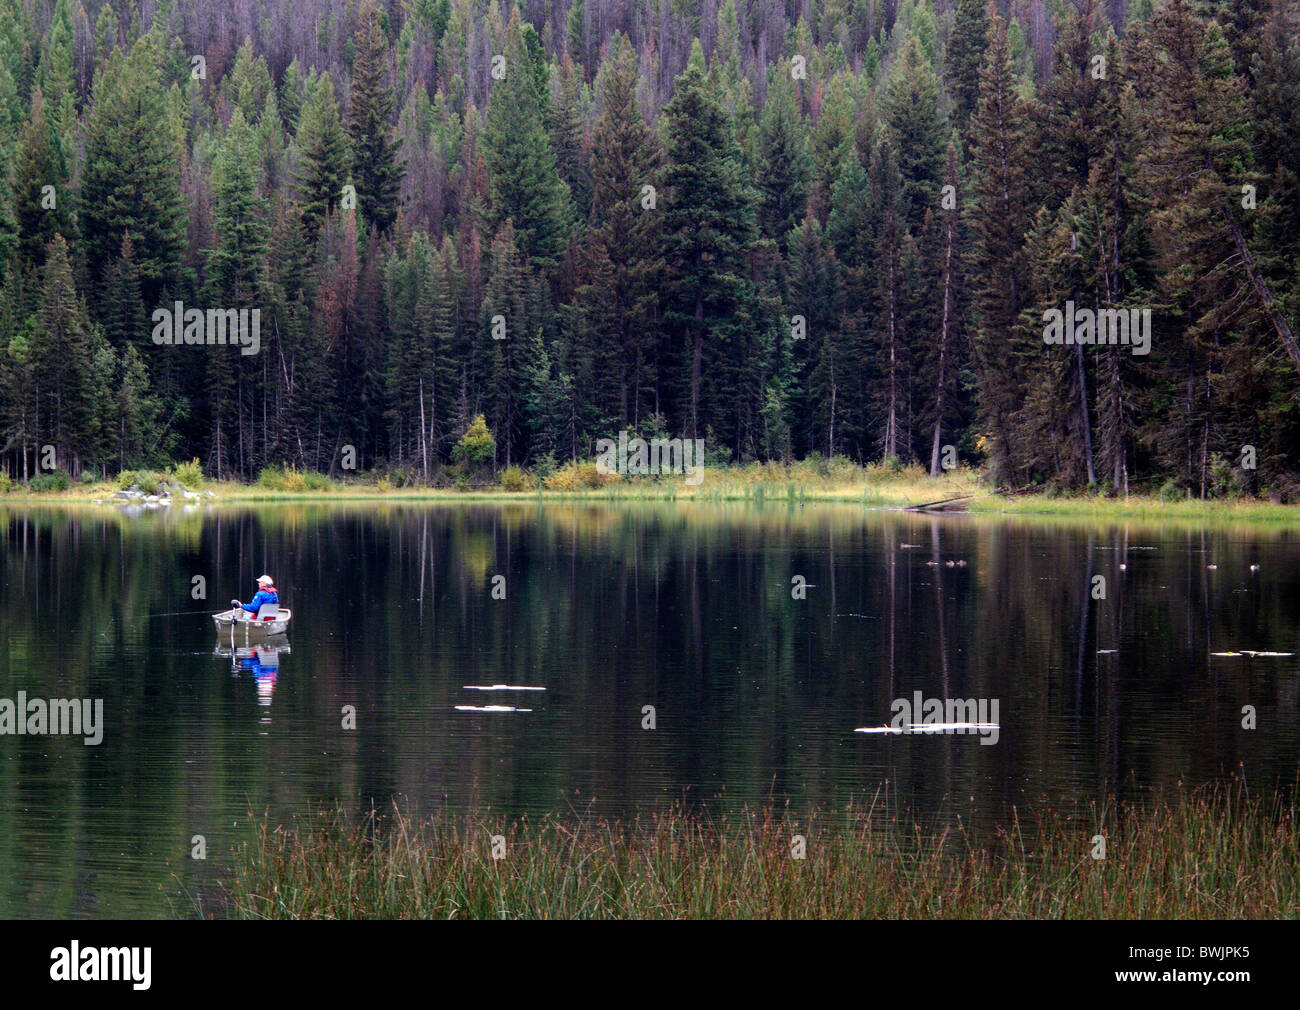 A fisherman in a boat on a lake in the Canadian Rocky Mountains in British Columbia Stock Photo